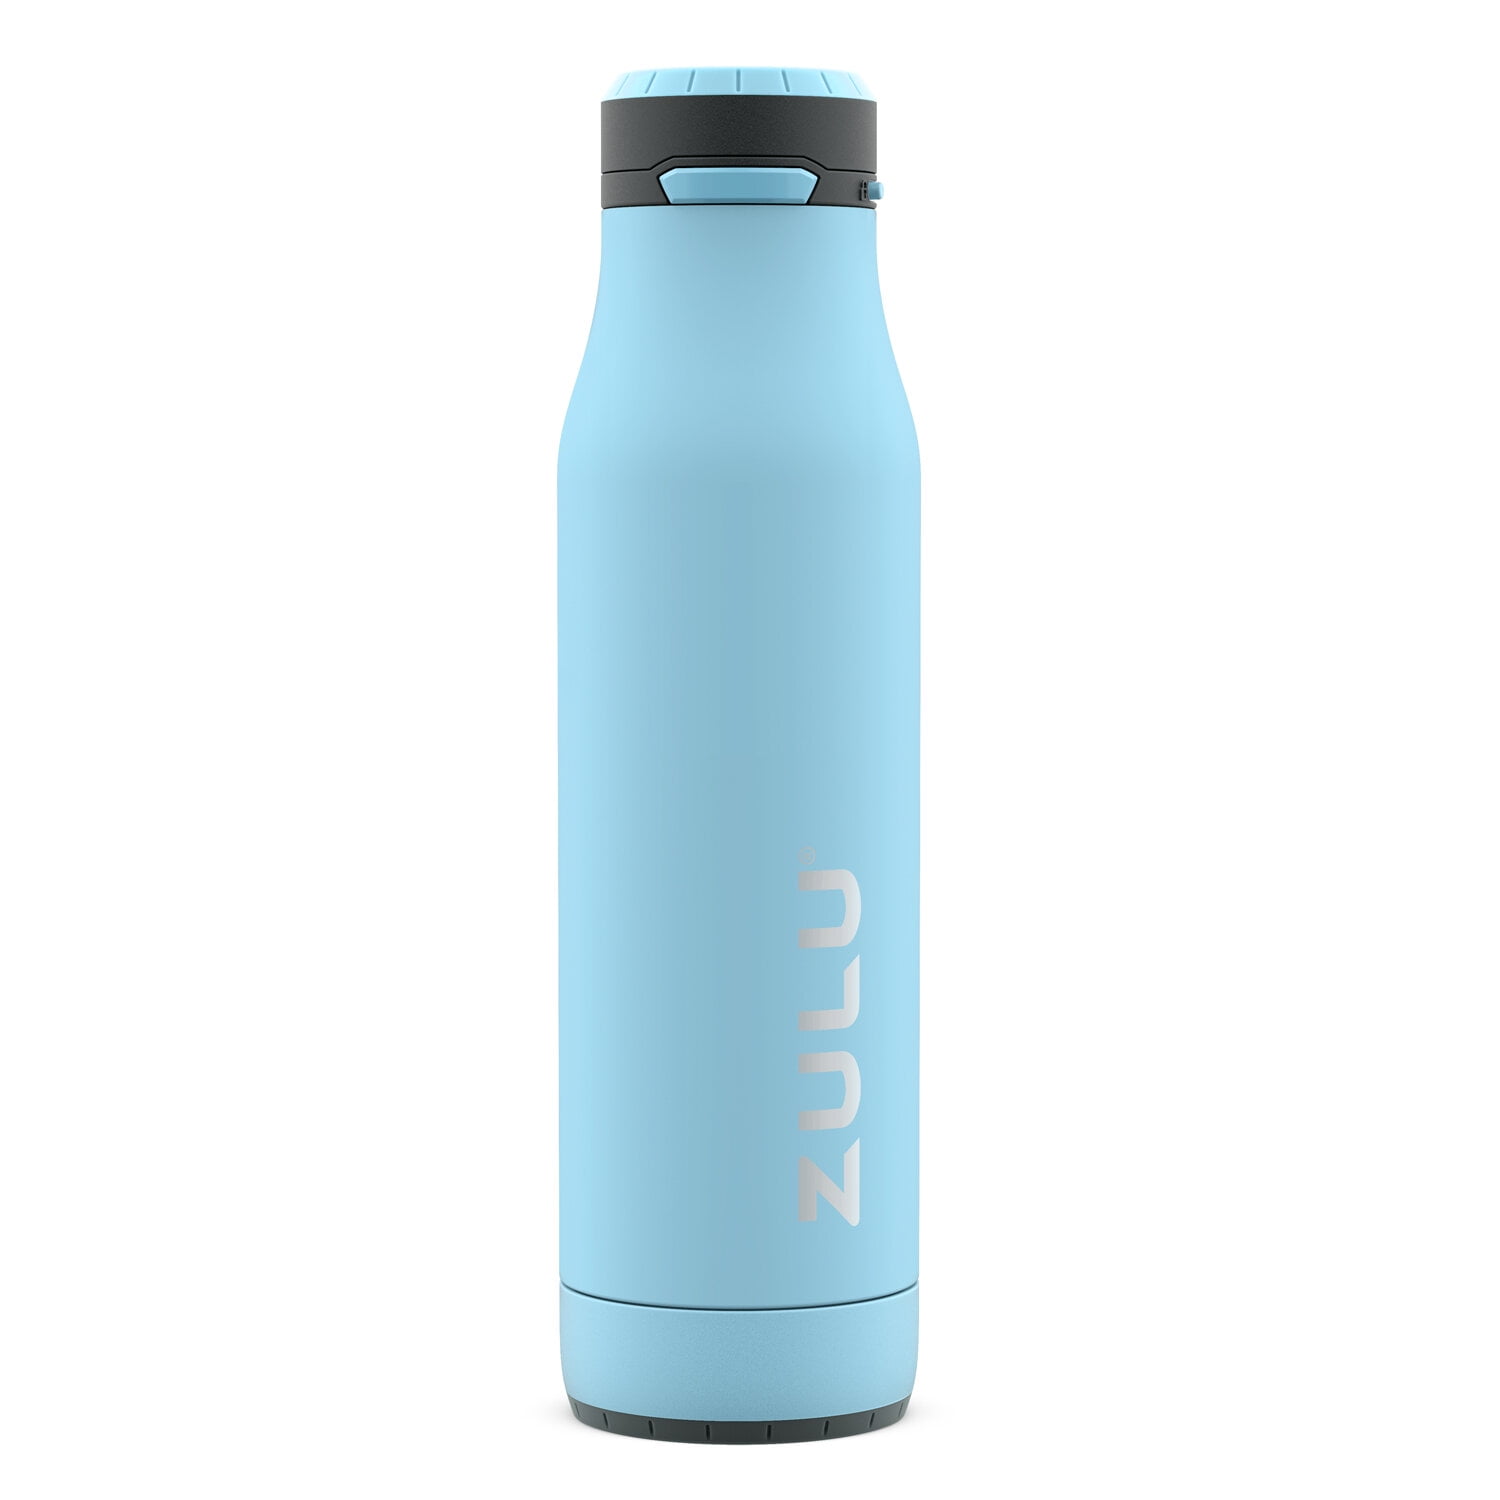 The Gym Keg 2.2l Sports Water Bottle Insulated - Multicolored : Target